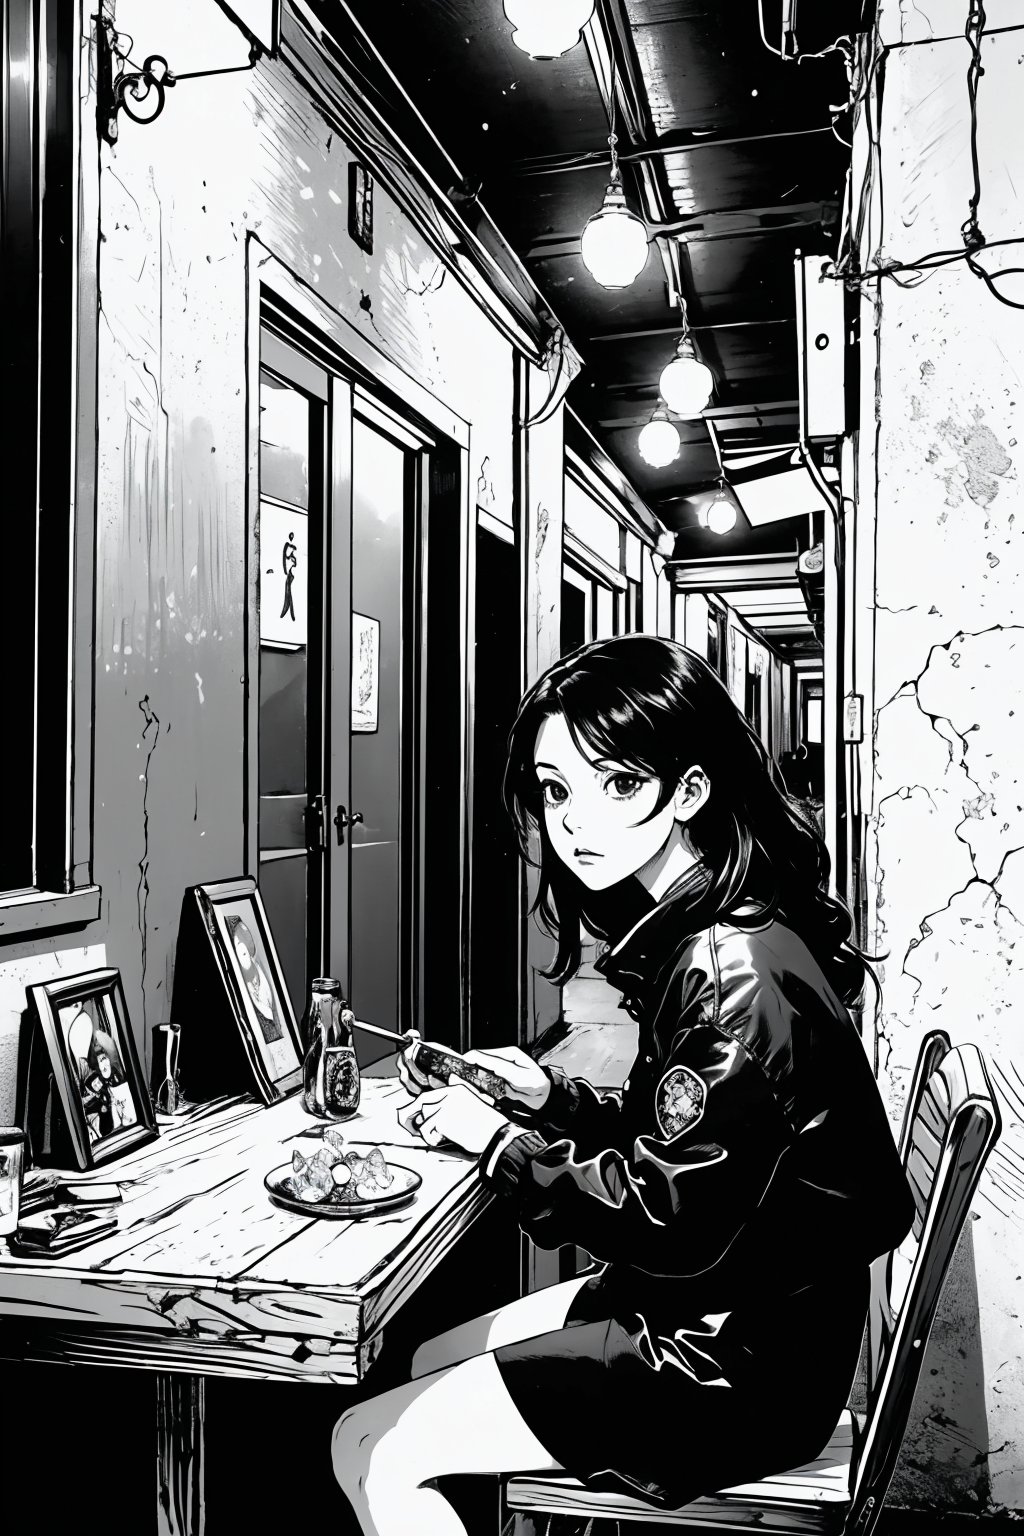 boichi manga style, monochrome, greyscale, in a corner of an alley, under dim street lights, a female astrologer set up a small stall. There was a crystal ball on the table that could predict the future. She sat behind the stall, waiting guest, ((masterpiece))